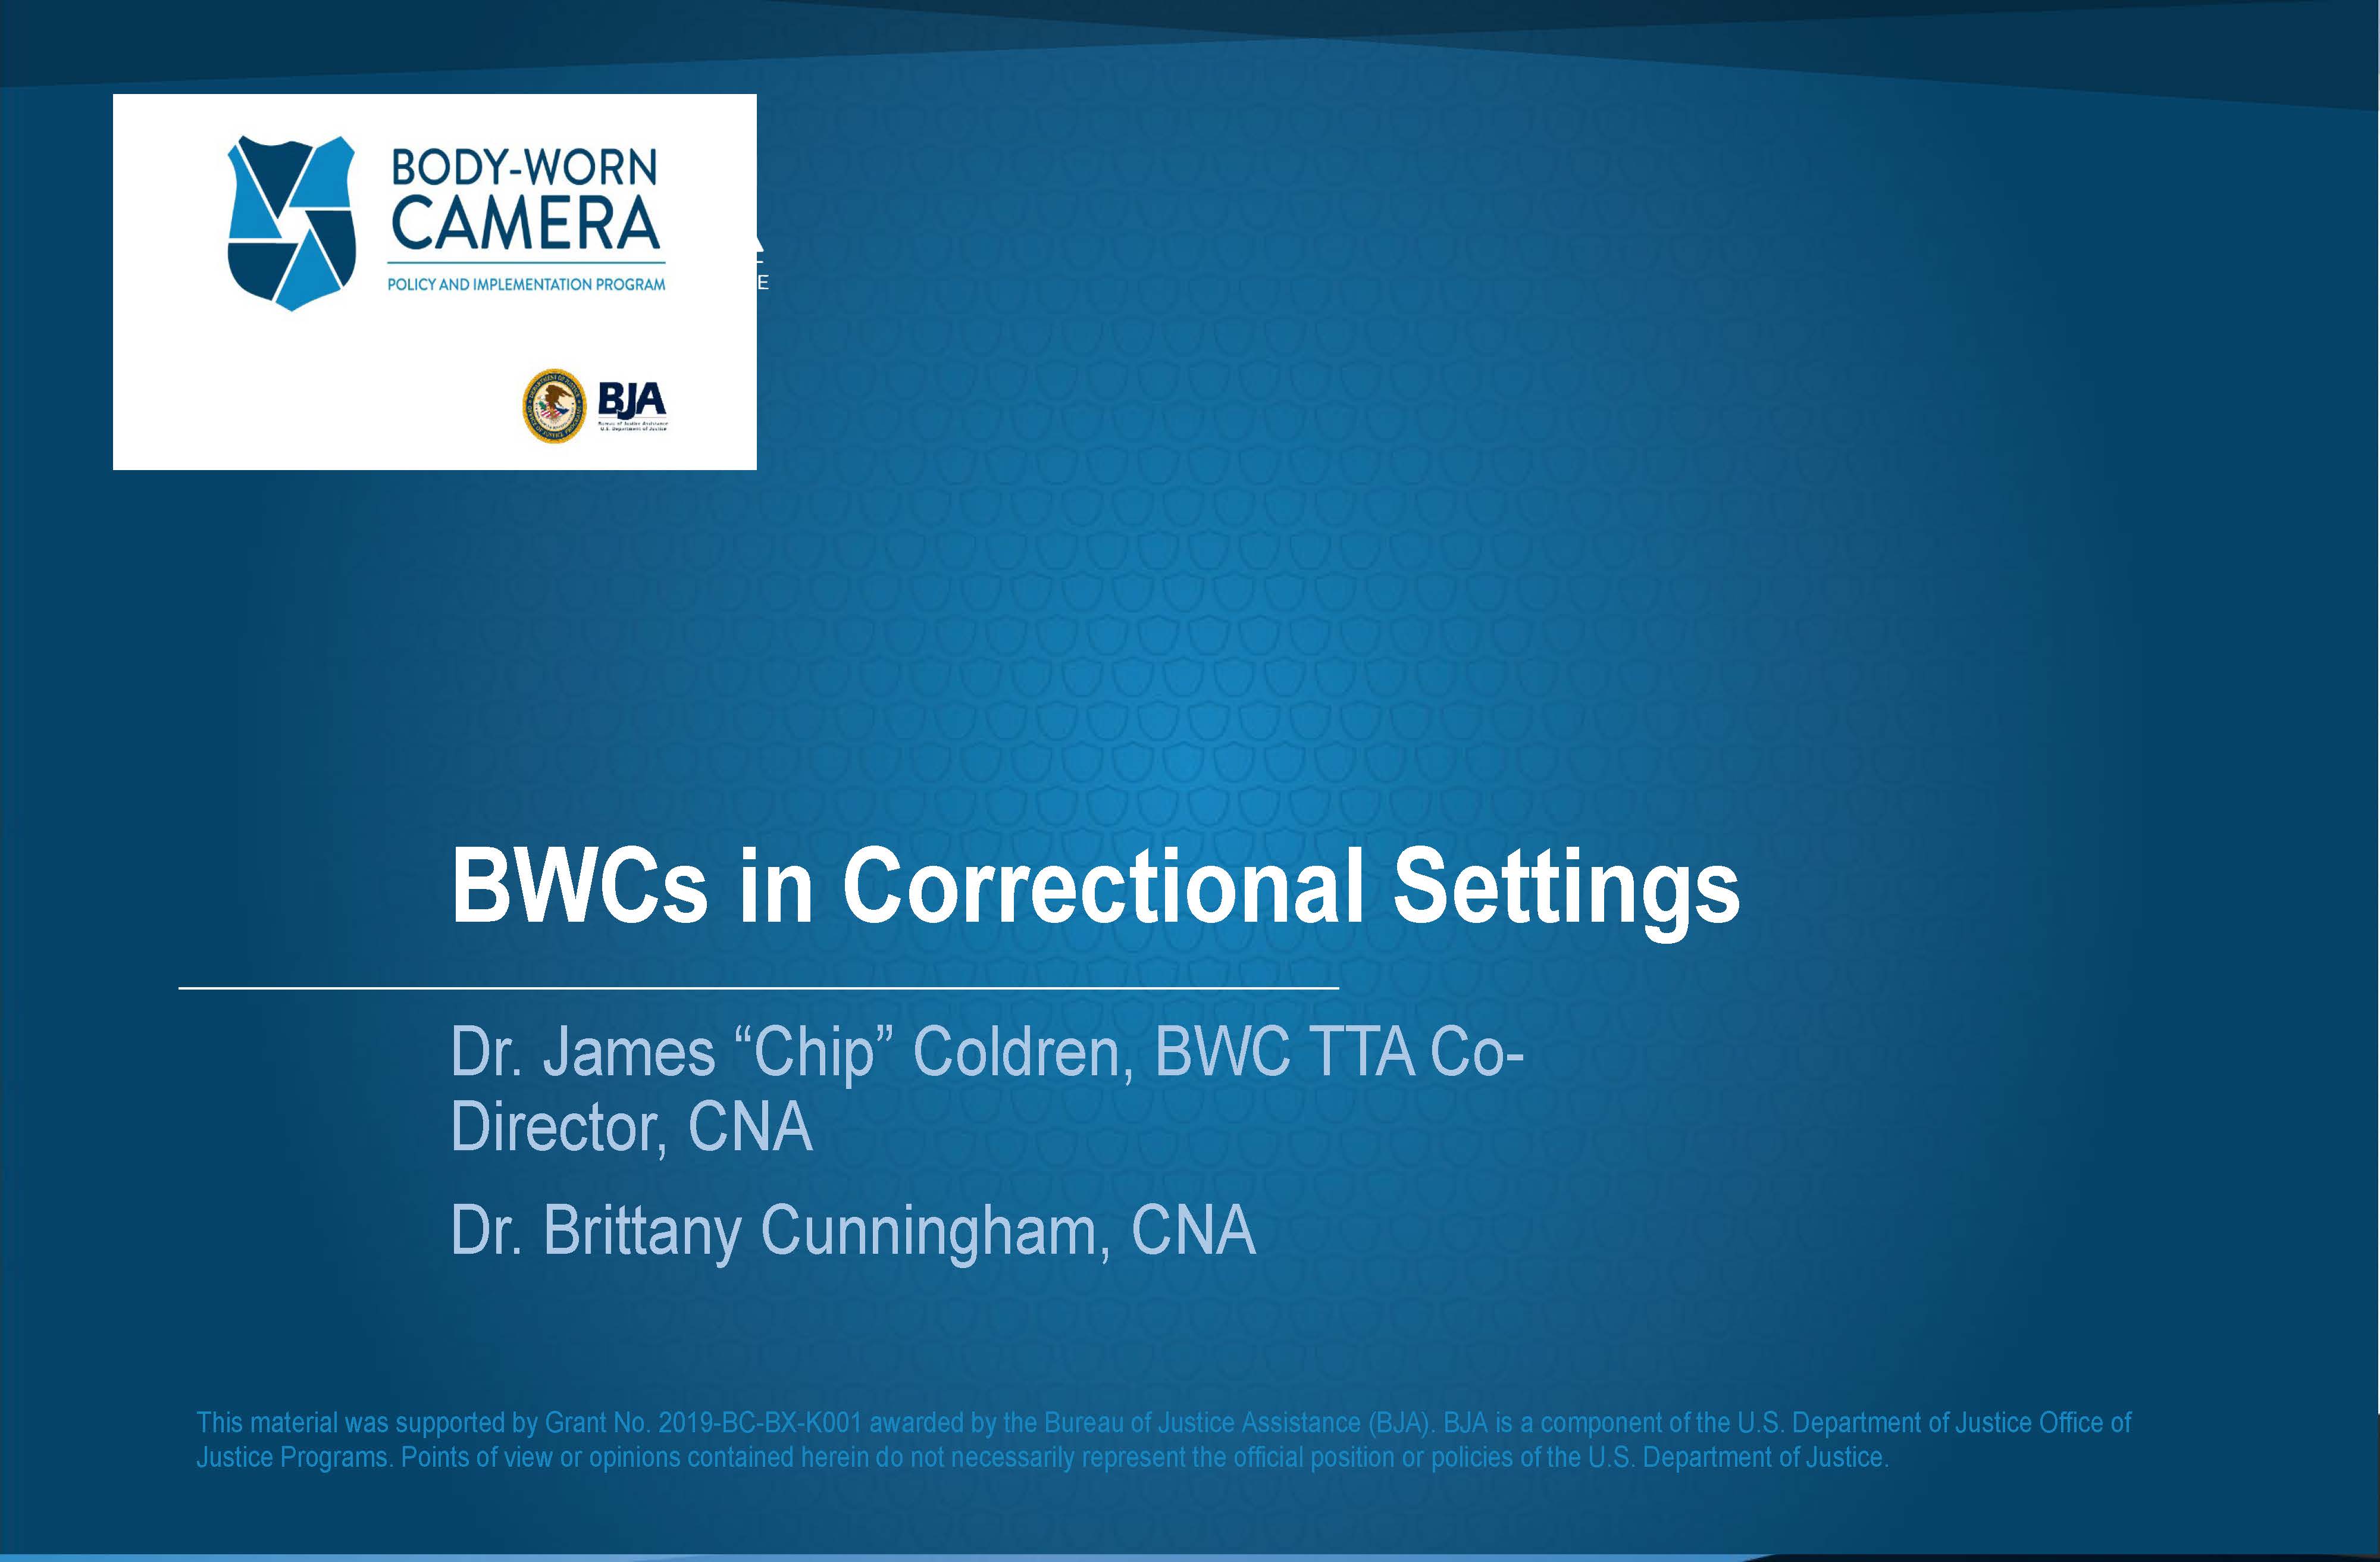 BWCs in correctional settings